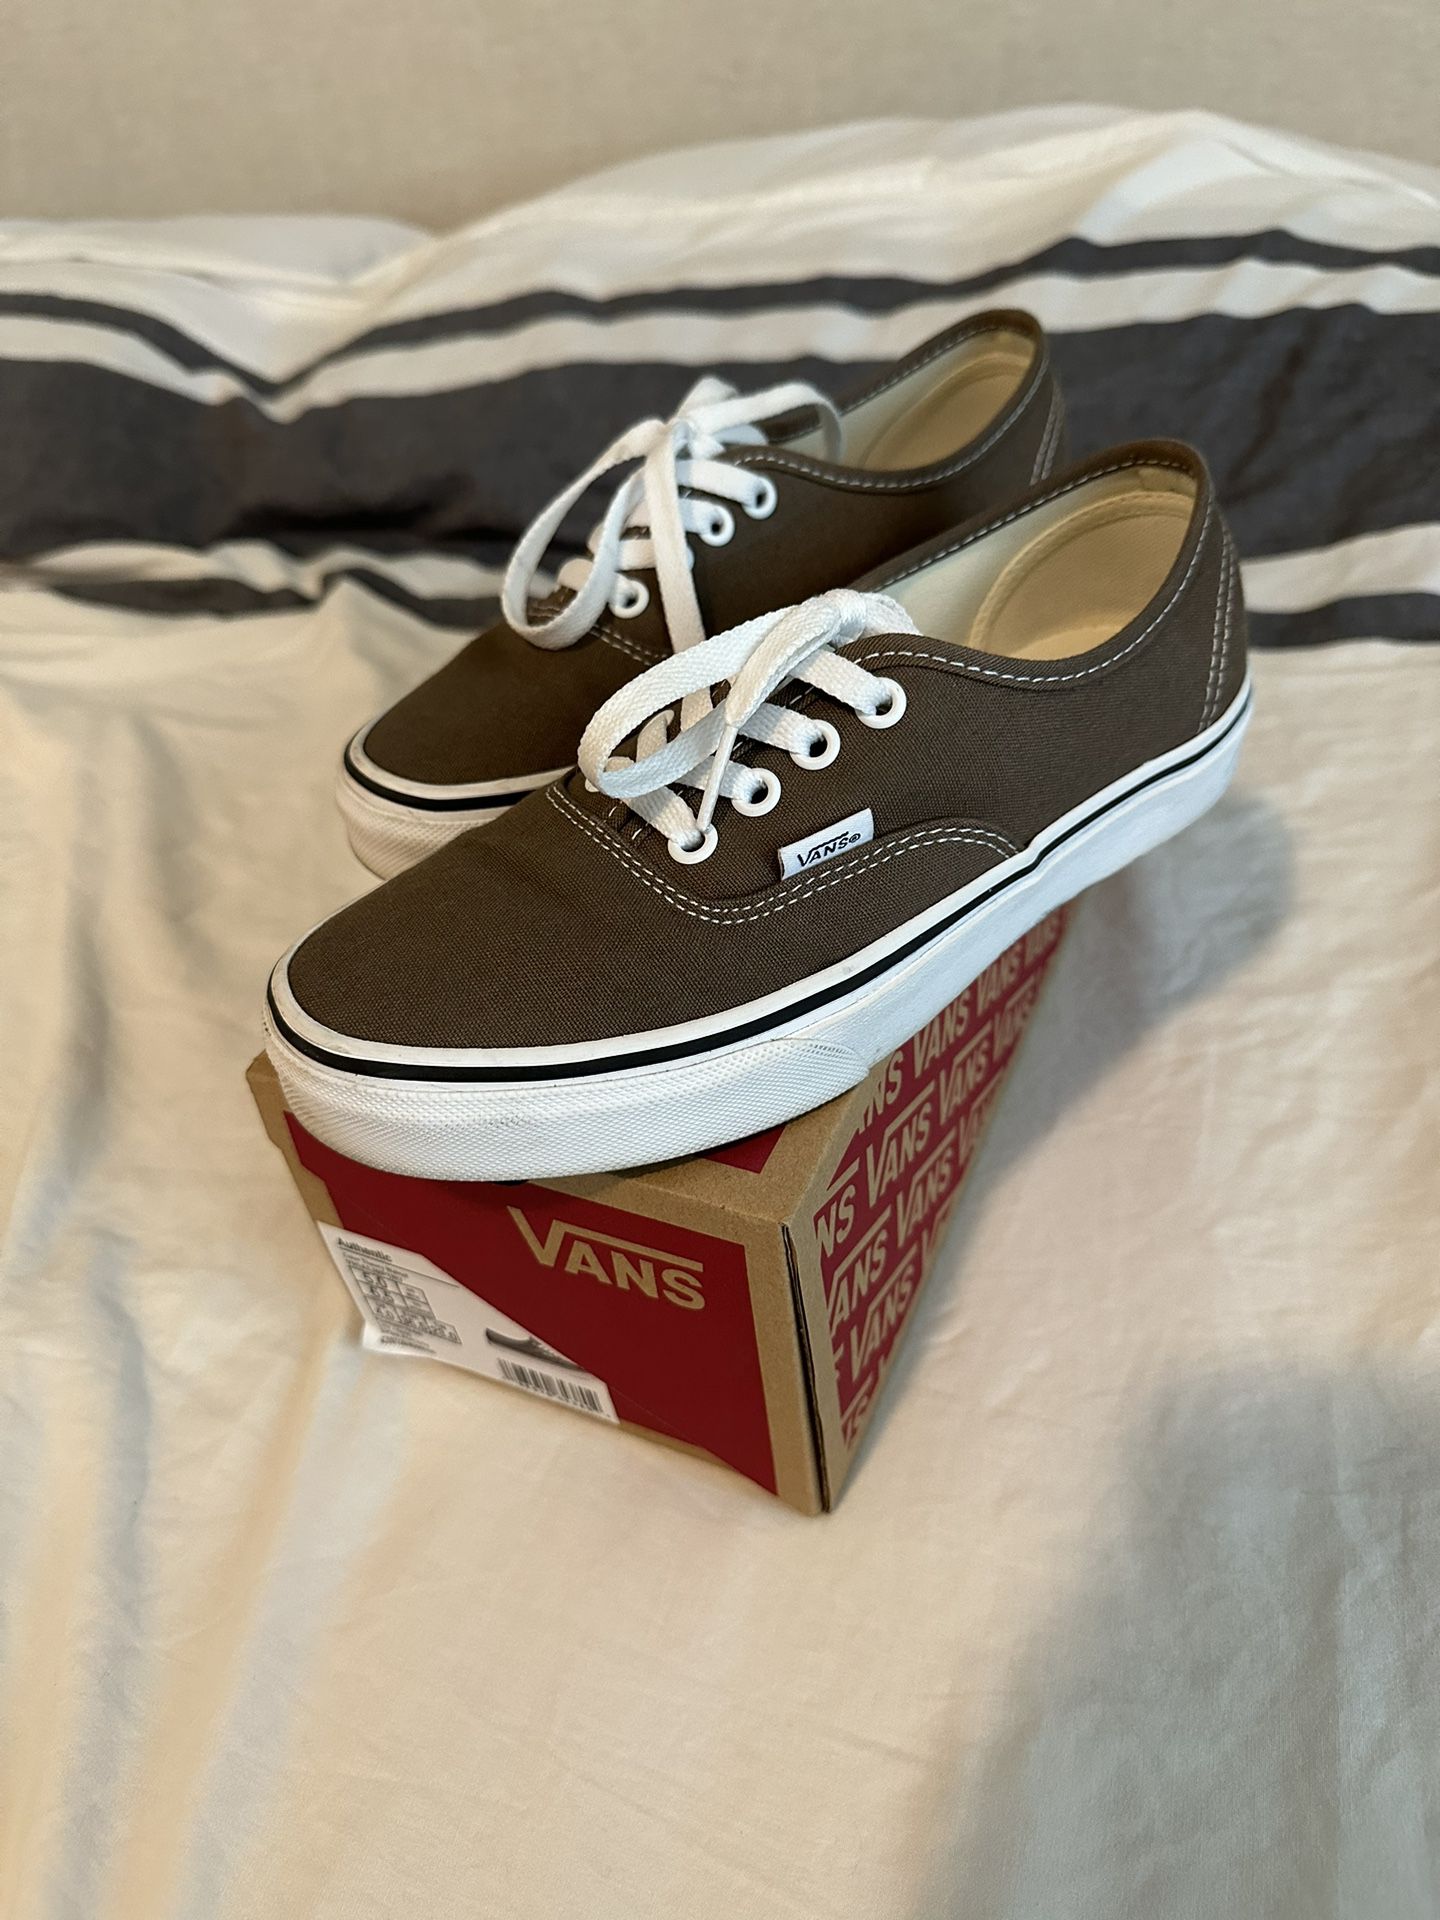 womens vans size 6.5. WORN ONCE.